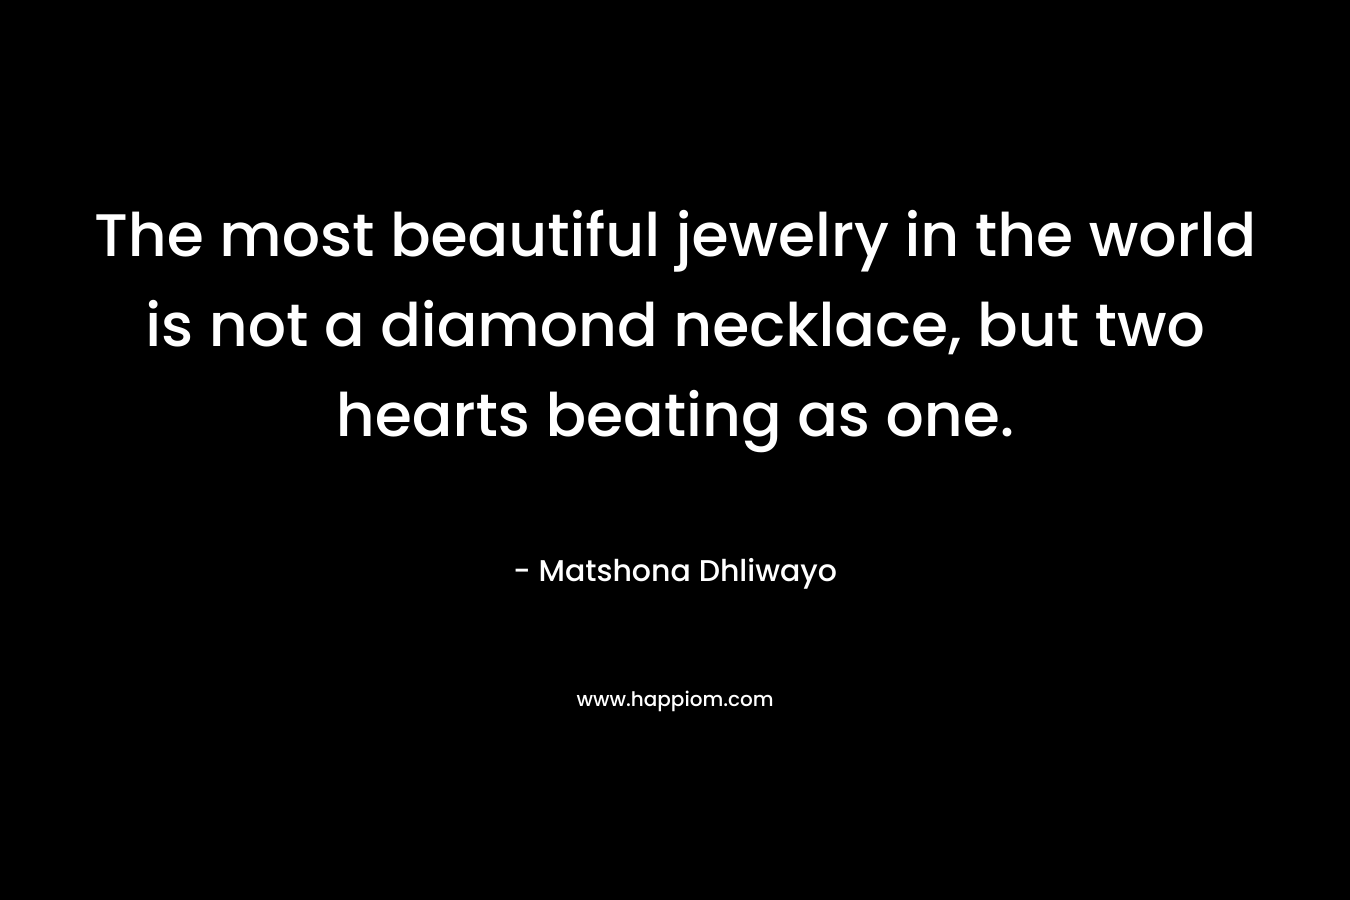 The most beautiful jewelry in the world is not a diamond necklace, but two hearts beating as one.